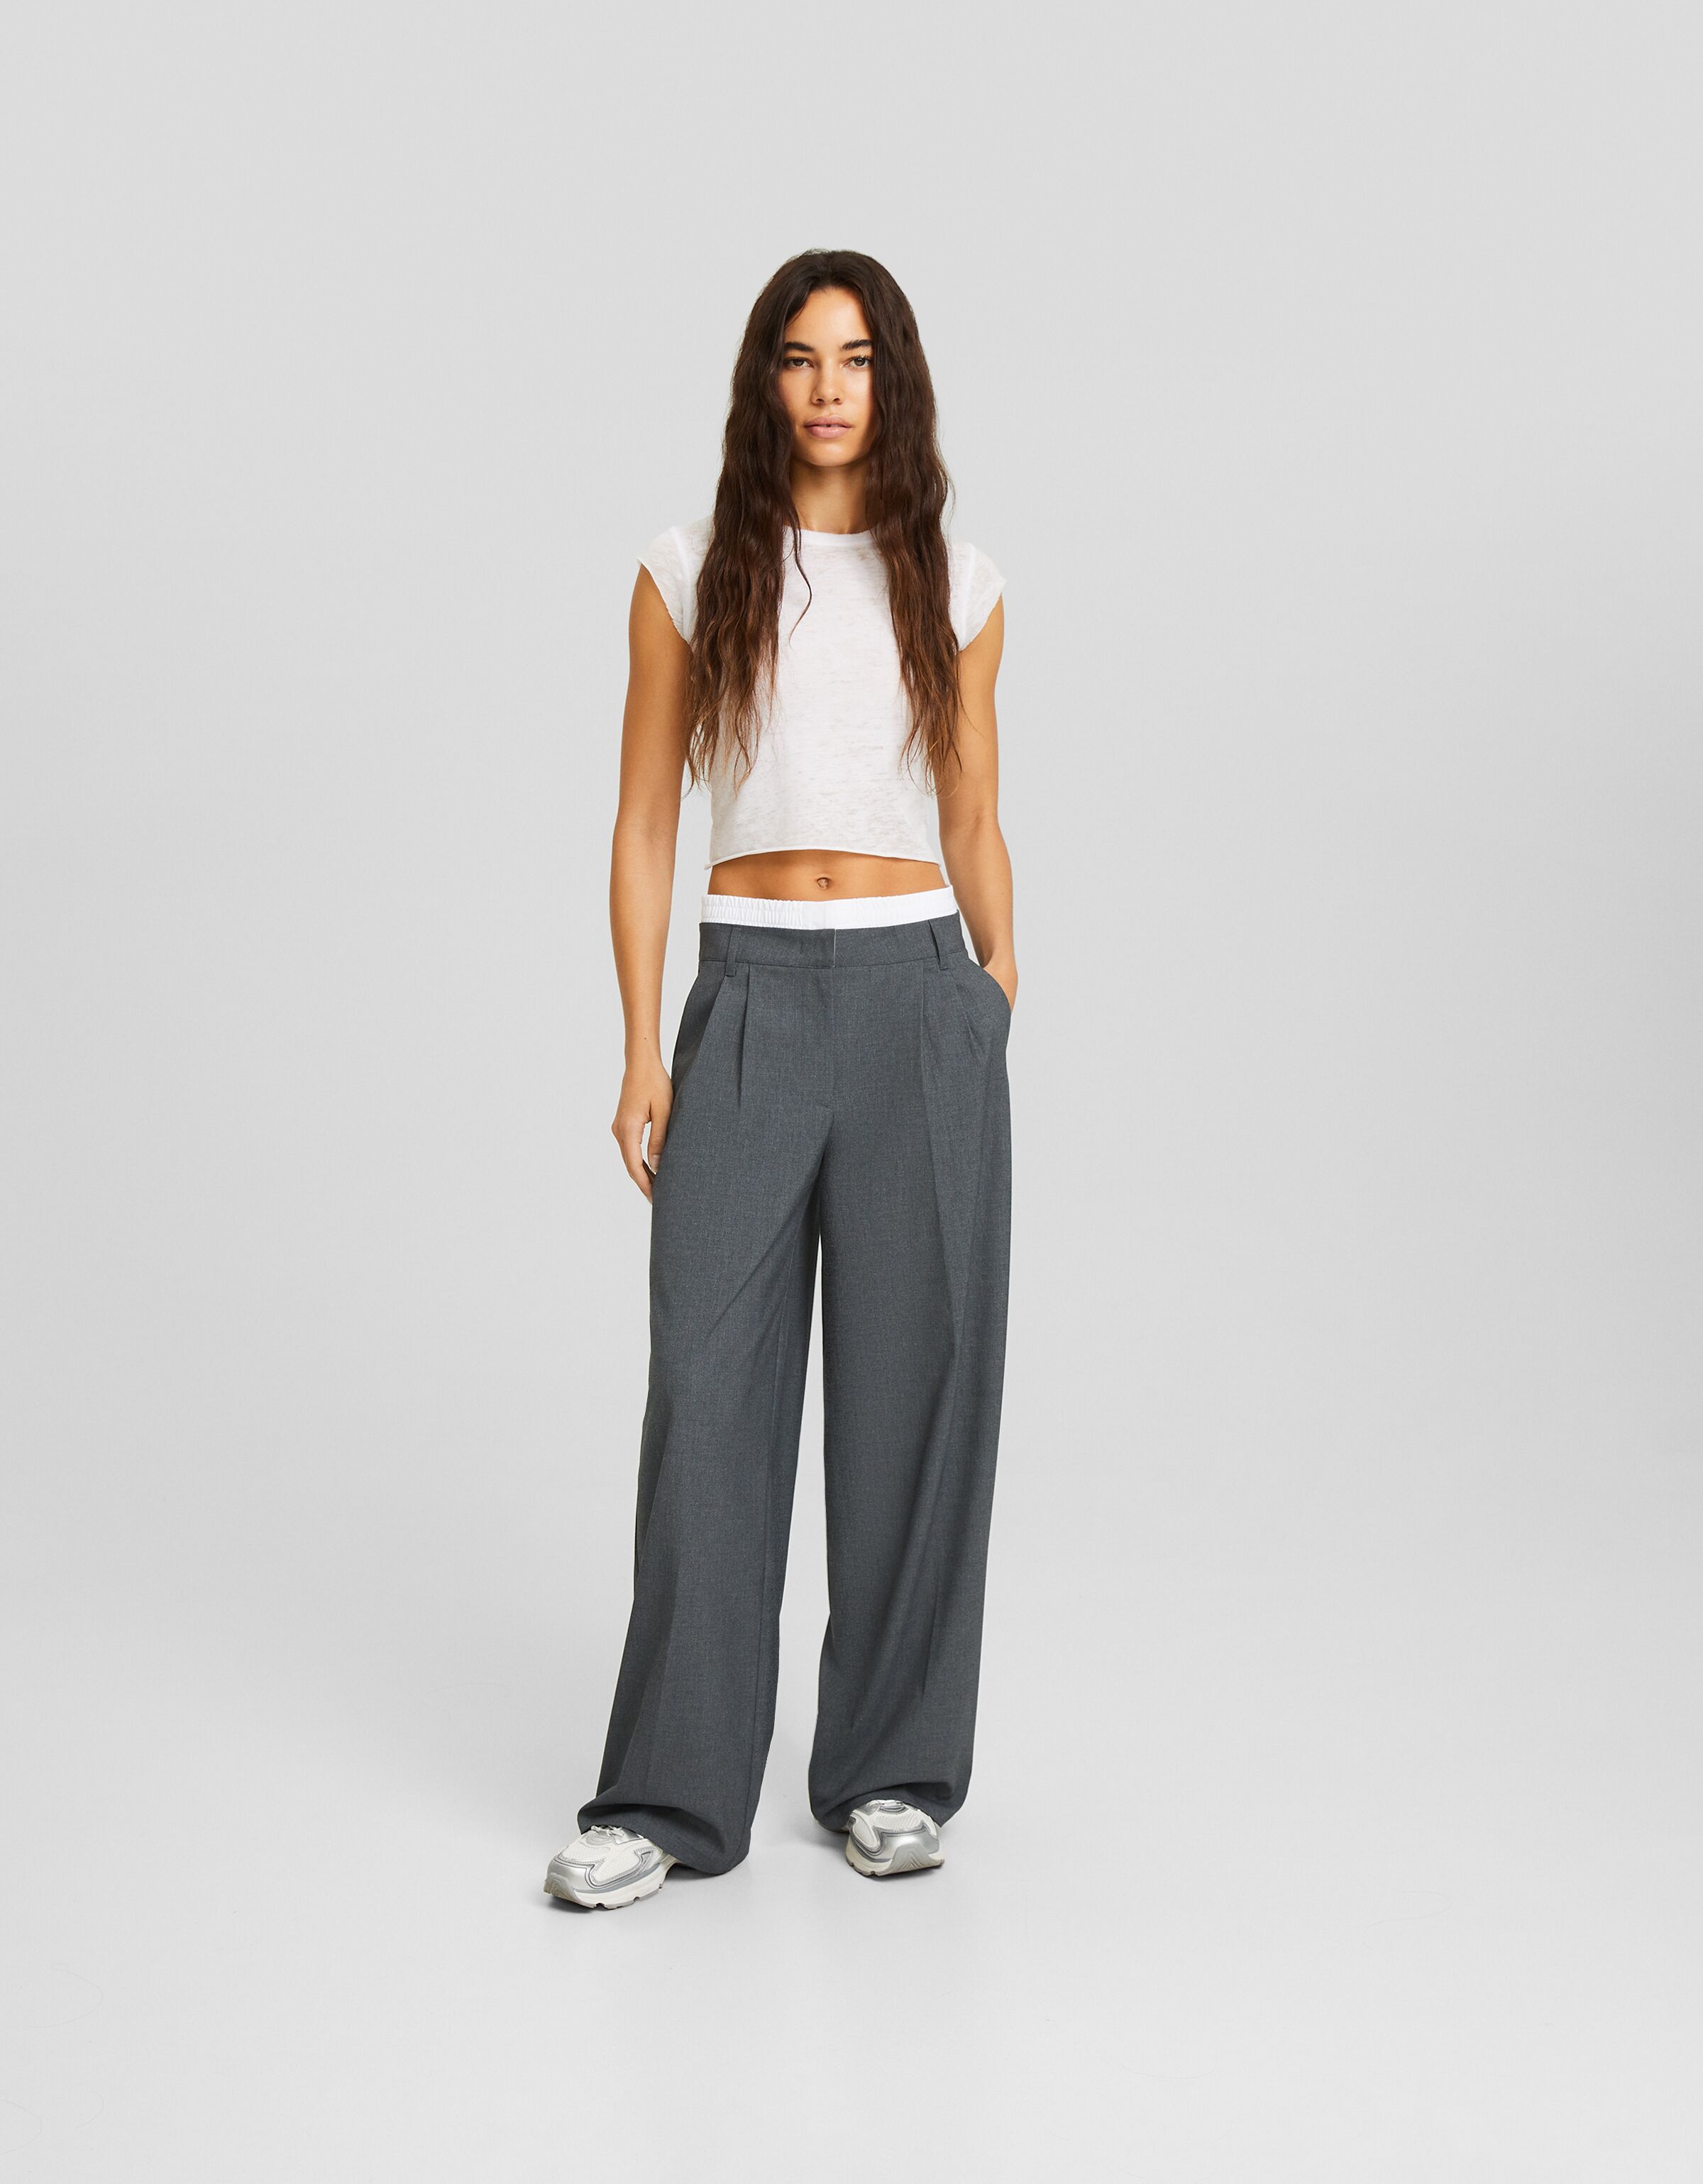 Womens Grey Tailored Trousers  John Lewis  Partners